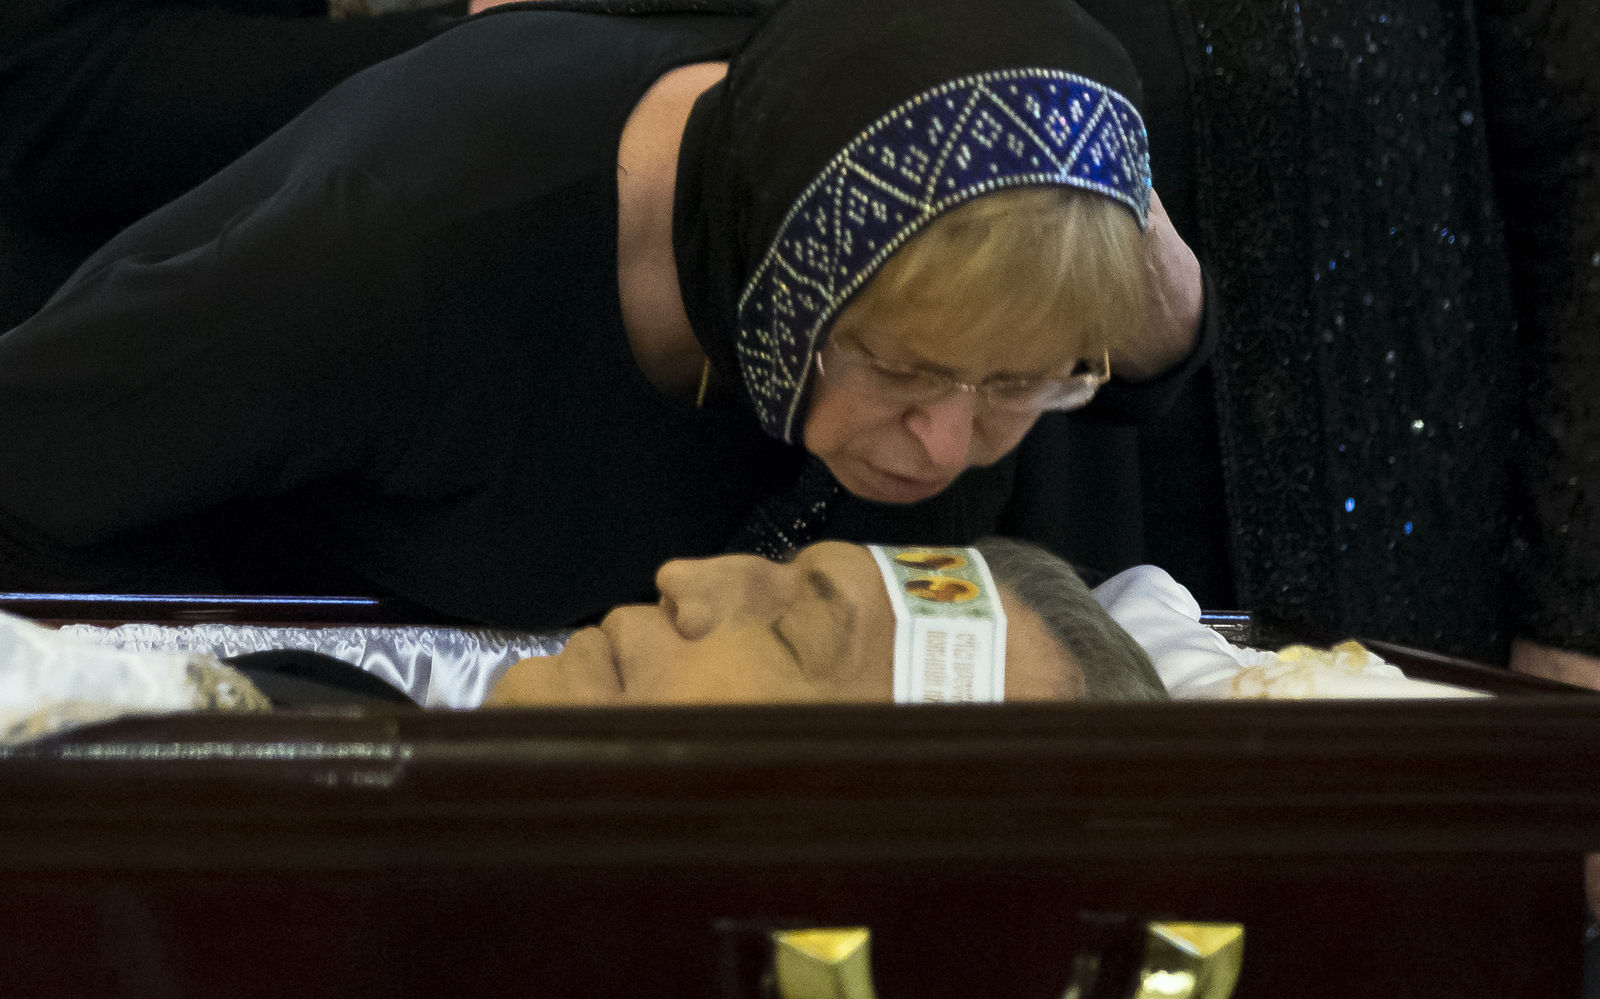 The widow of Andrei Karlov Marina kisses her husband during a religious service for killed Russian ambassador to Turkey, Andrei Karlov inside the Christ the Saviour Cathedral in Moscow, Russia, Thursday, Dec. 22, 2016.(AP/Alexander Zemlianichenko)